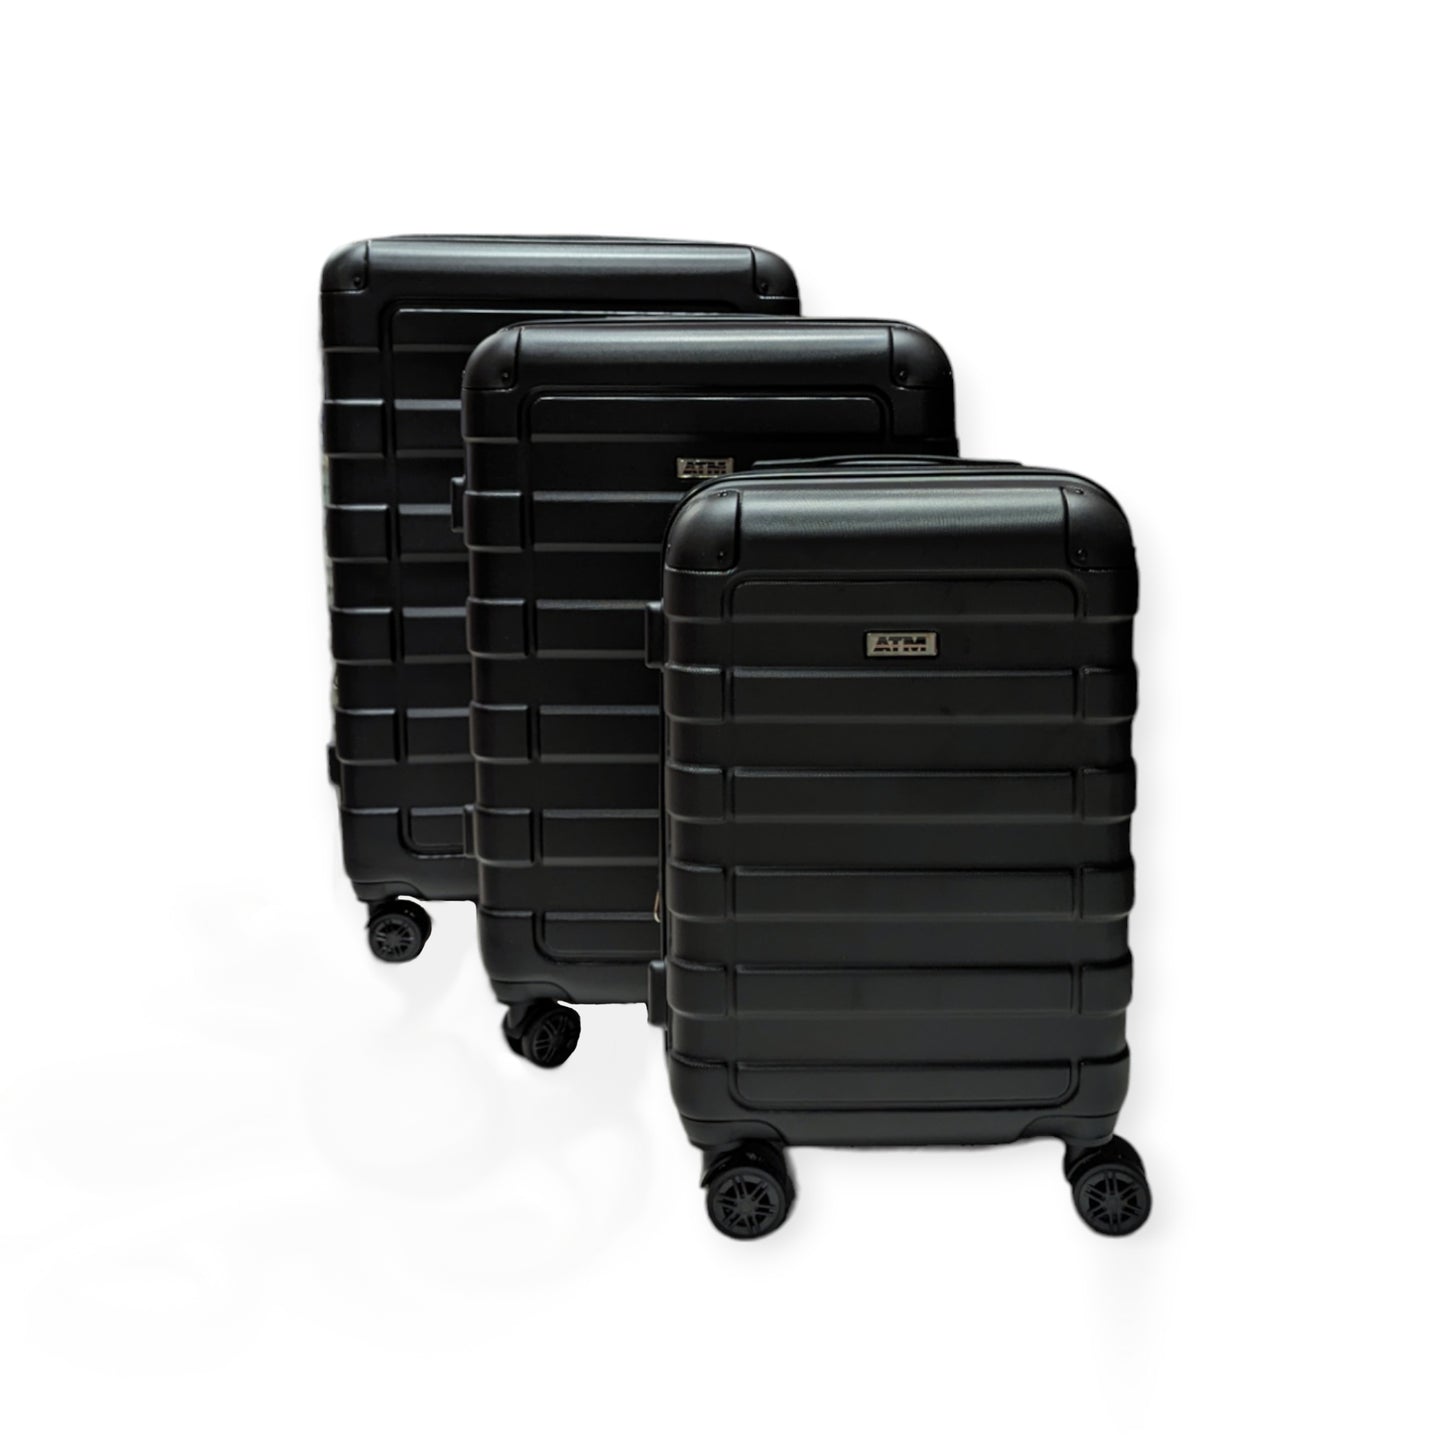 Classic Collection Black Luggage 3 Piece Set (20/26/30") Suitcase Lock Spinner